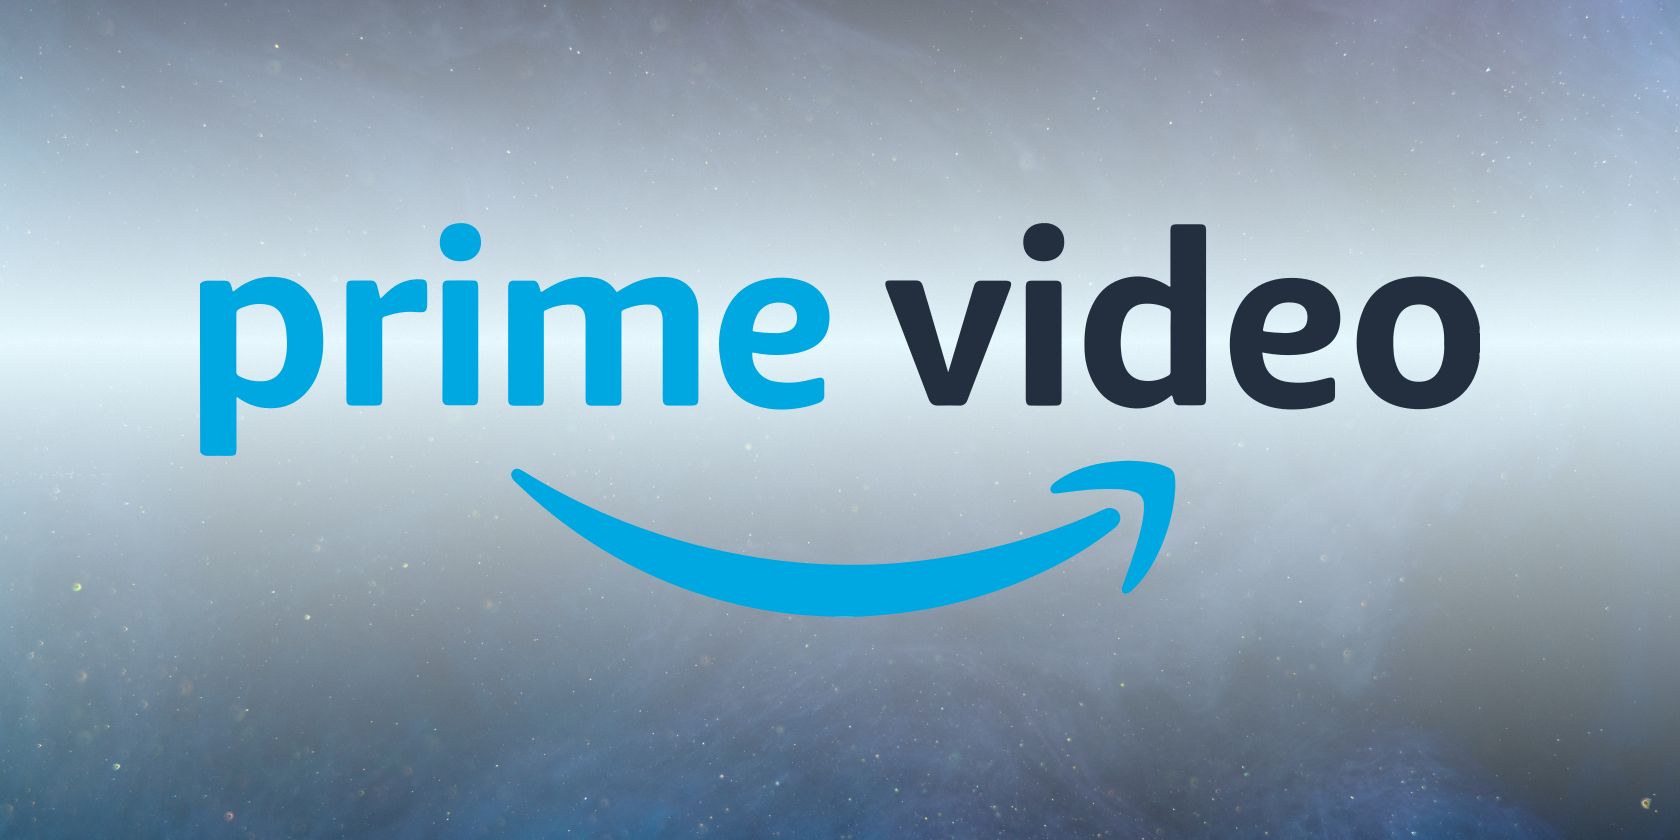 prime video logo on space background